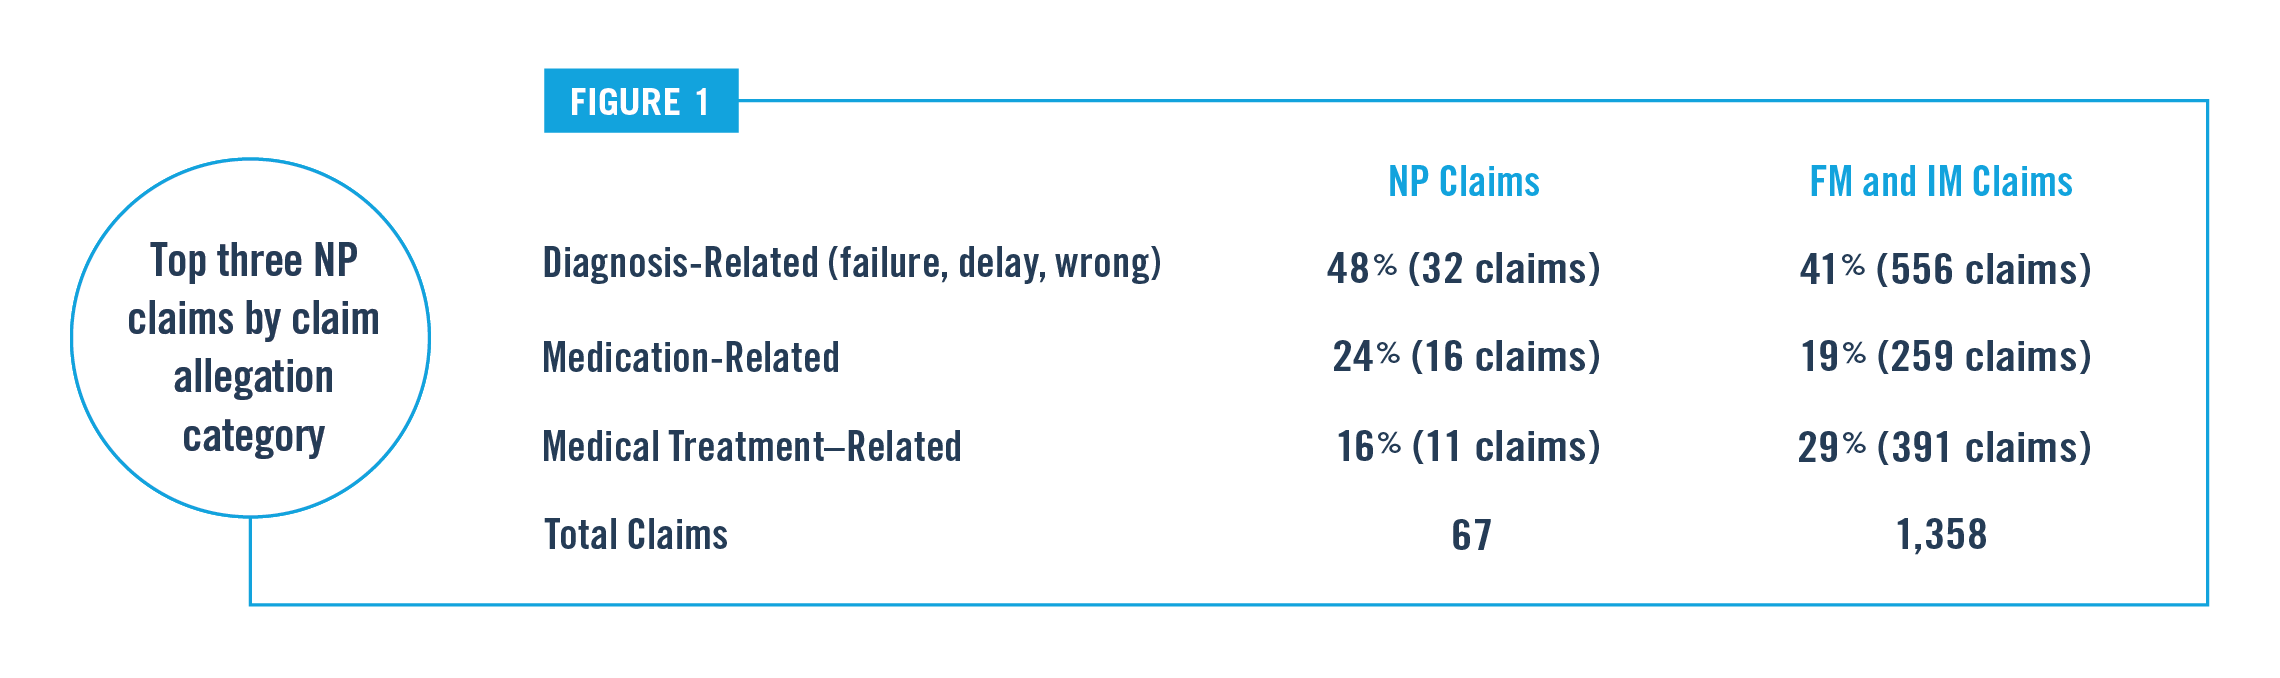 Top Three NP Claims by Claims Allegation Category Chart